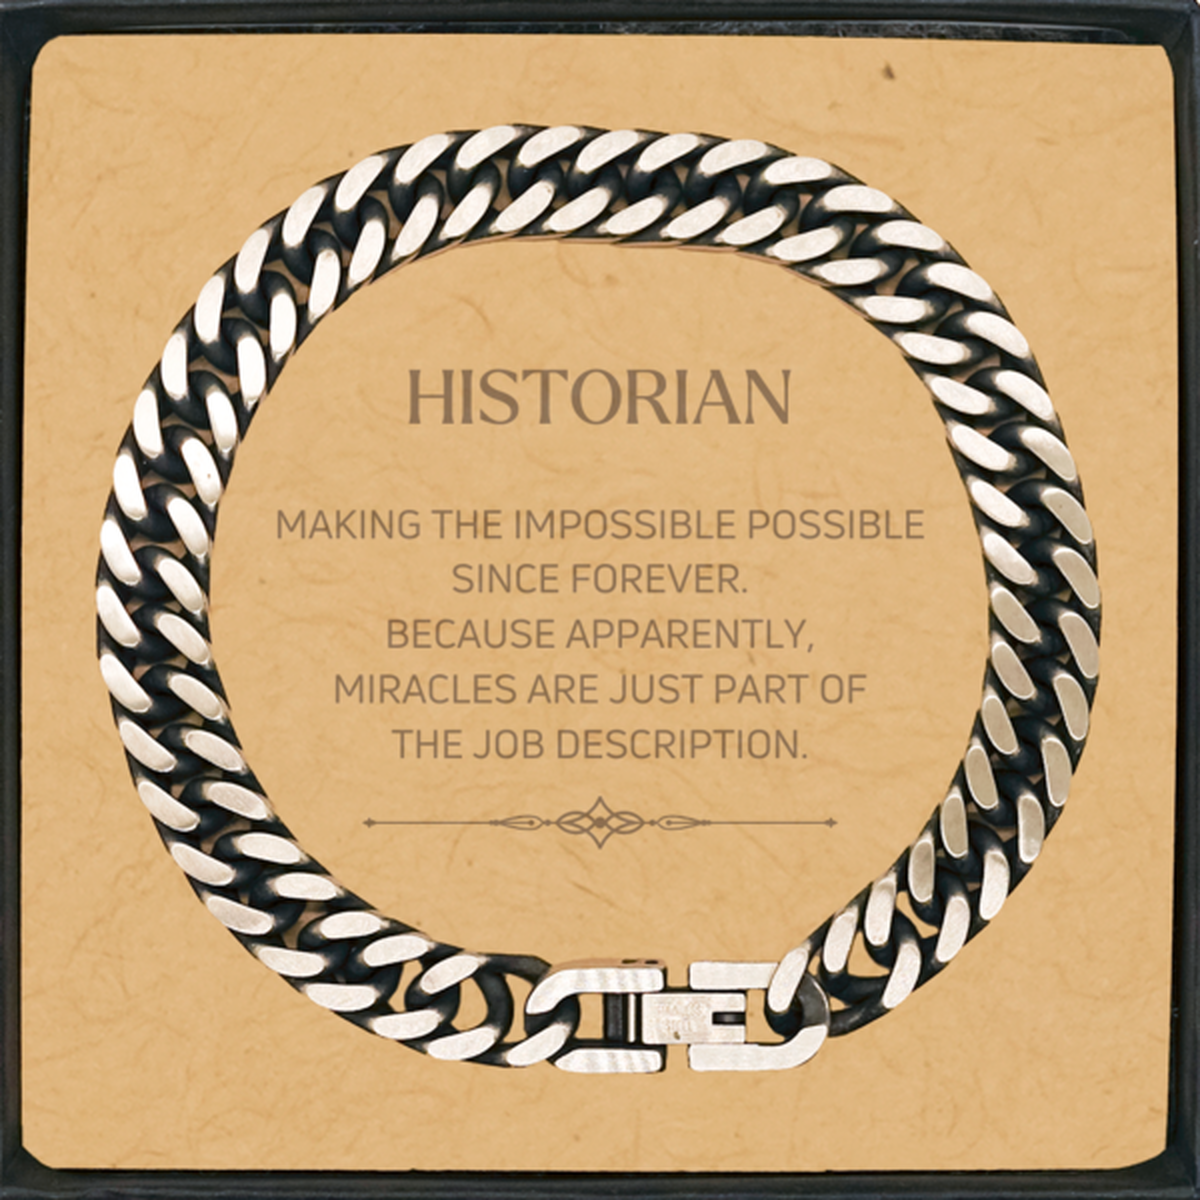 Funny Historian Gifts, Miracles are just part of the job description, Inspirational Birthday Cuban Link Chain Bracelet For Historian, Men, Women, Coworkers, Friends, Boss